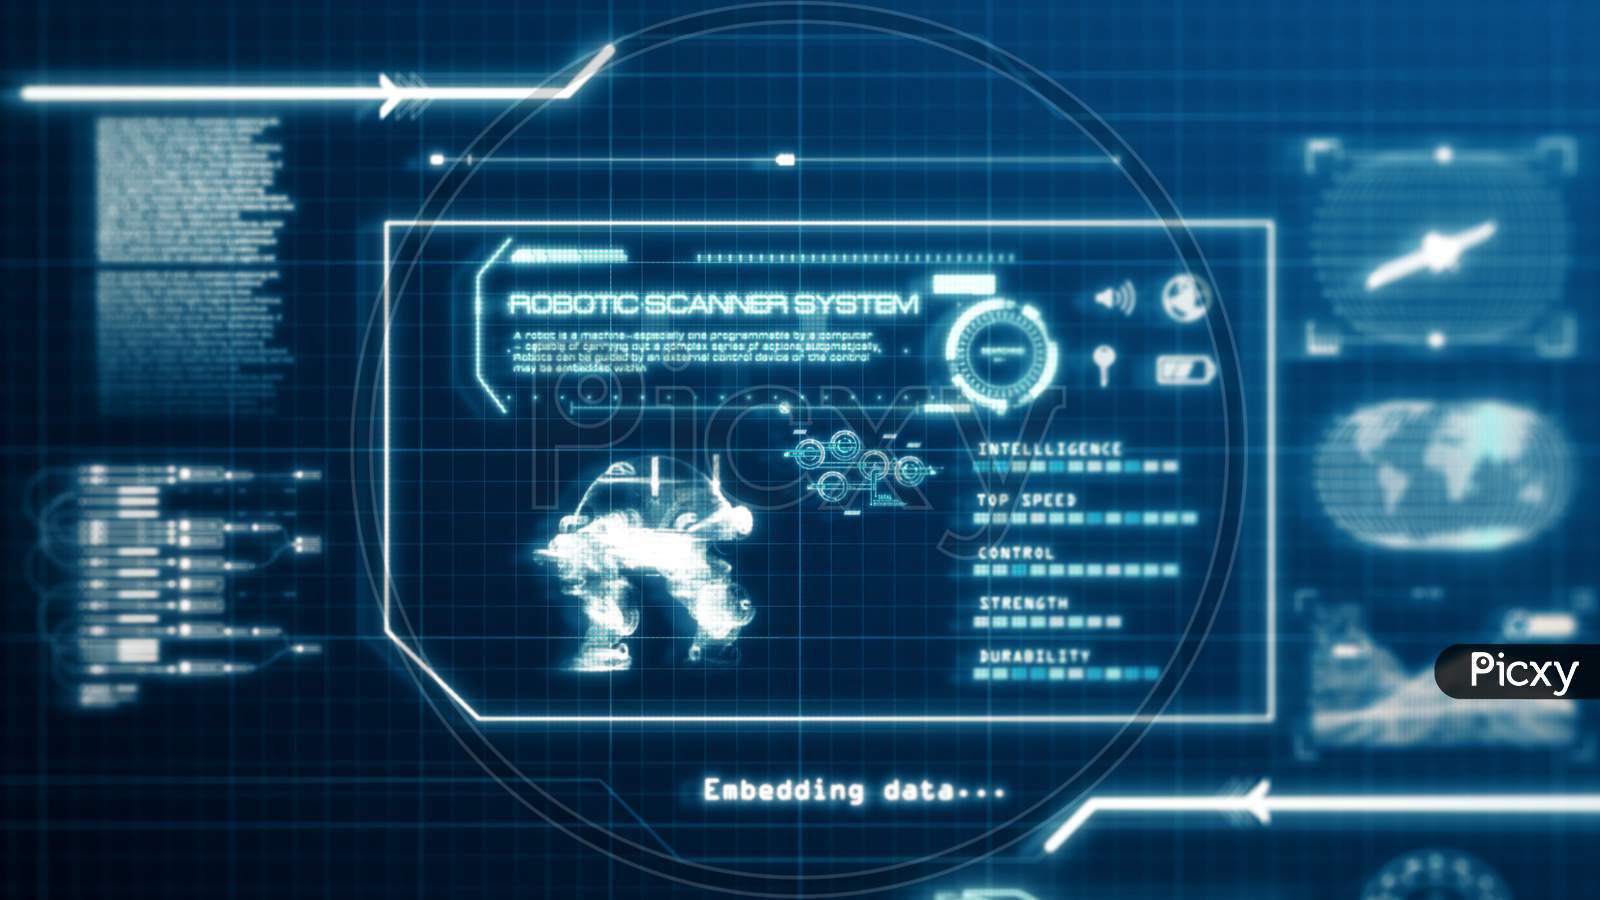 Hud Robot Scanning System Ability User Interface Computer Screen Display With Pixels Background. Blue Abstract Hologram Holographic Technology Concept. Sci-Fi. 3D Illustration Rendering Graphic Design